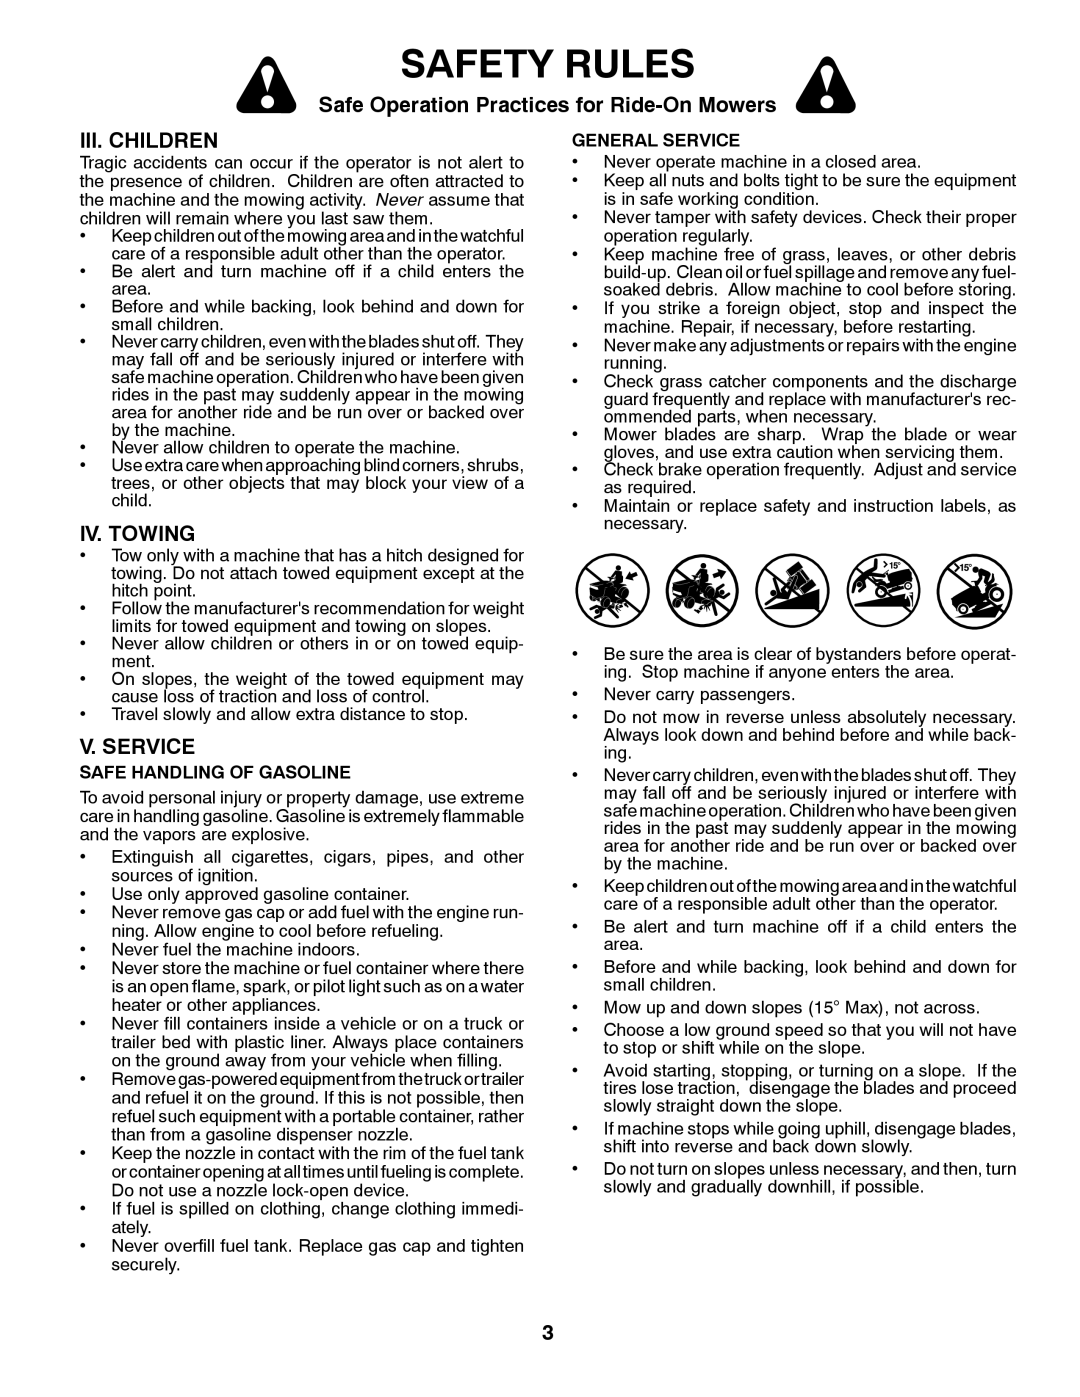 Poulan 96042002400 Iii. Children, Iv. Towing, V. Service, Safety Rules, Safe Operation Practices for Ride-On Mowers 